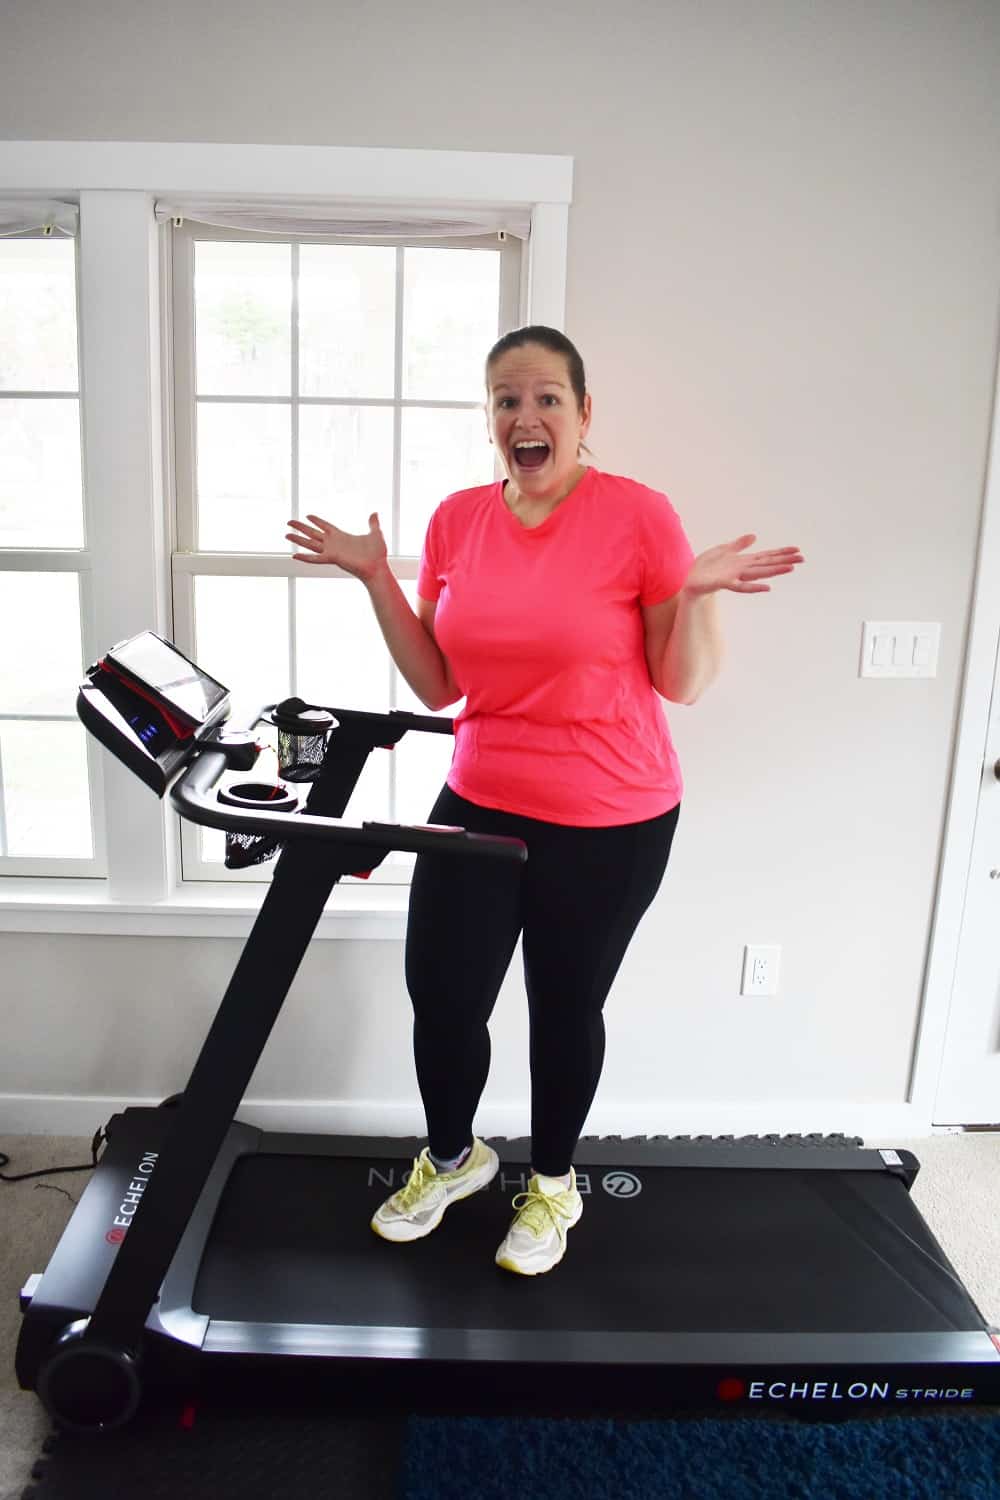 A woman excited to have an Echelon treadmill.